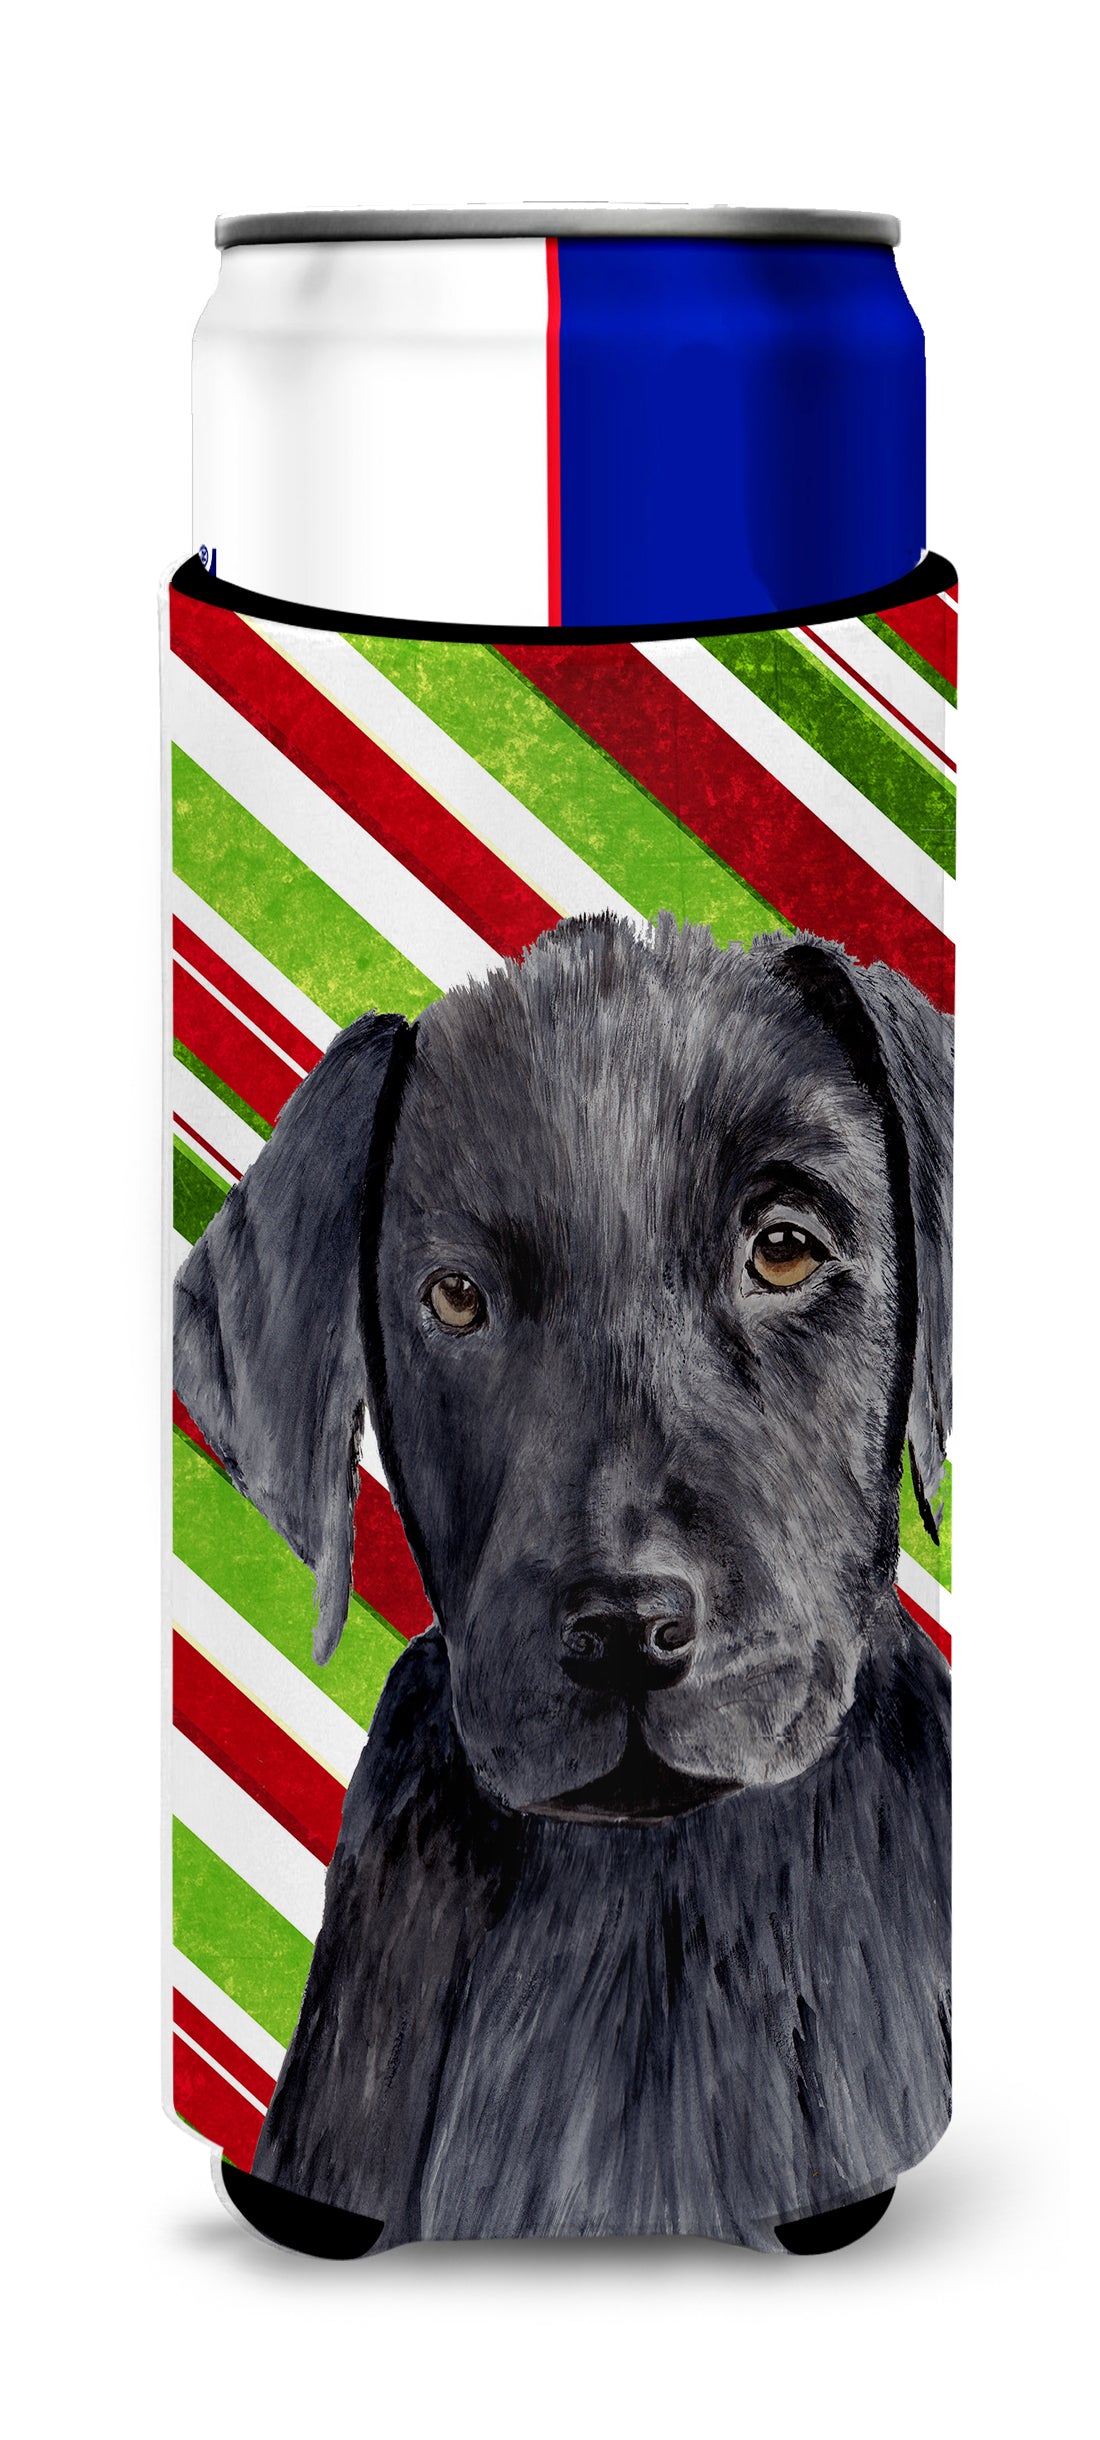 Labrador Candy Cane Holiday Christmas Ultra Beverage Insulators for slim cans SC9324MUK.